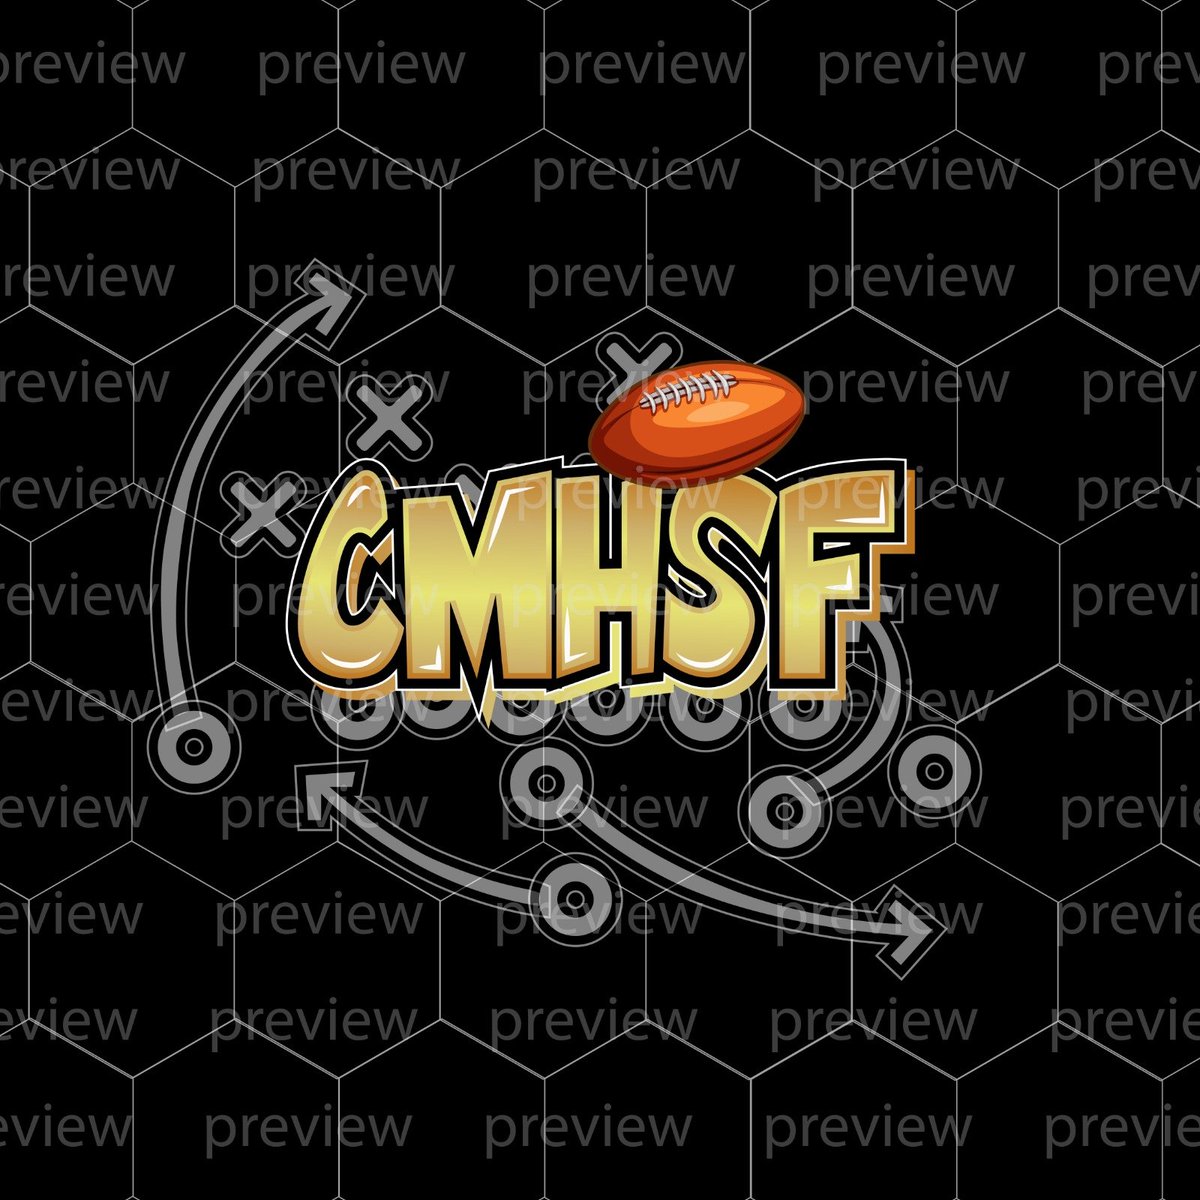 Design Description: In the foreground, position the text 'CMHSF' prominently. Use a bold and elegant font for the letters, and color them in gold to match the client's request. Ensure the letters are easily readable against the background. Place the football diagram in the…